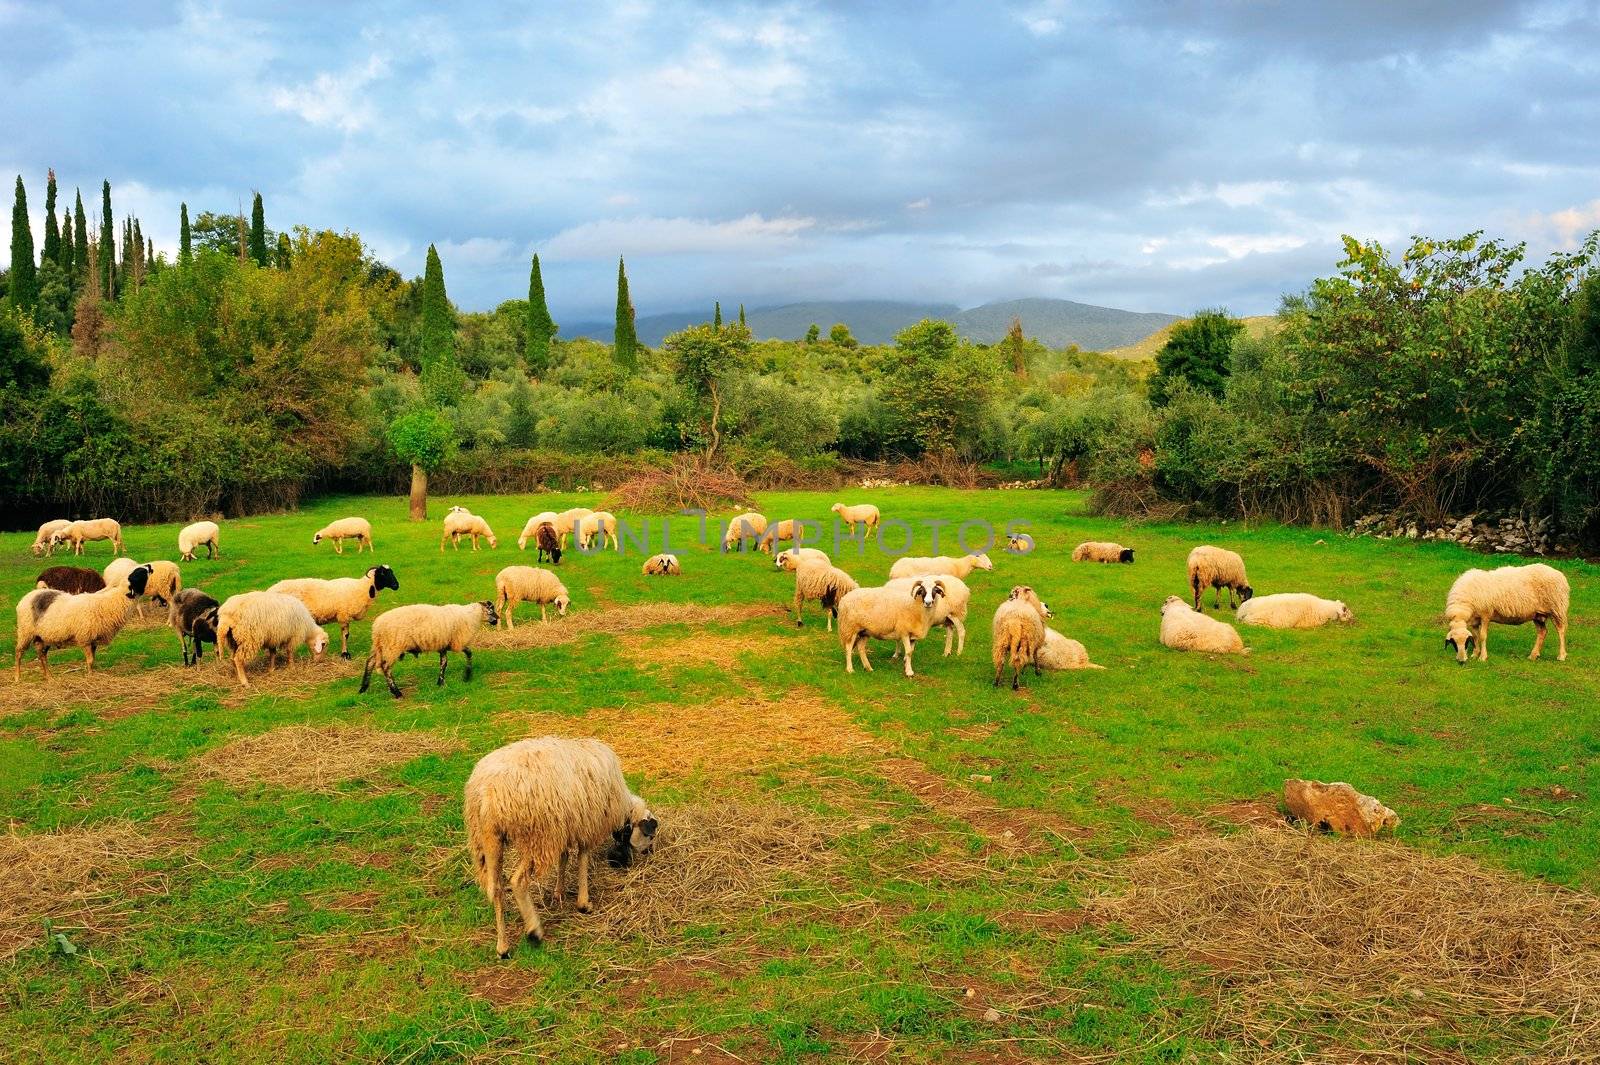 Flock of sheep in pasture during late afternoon